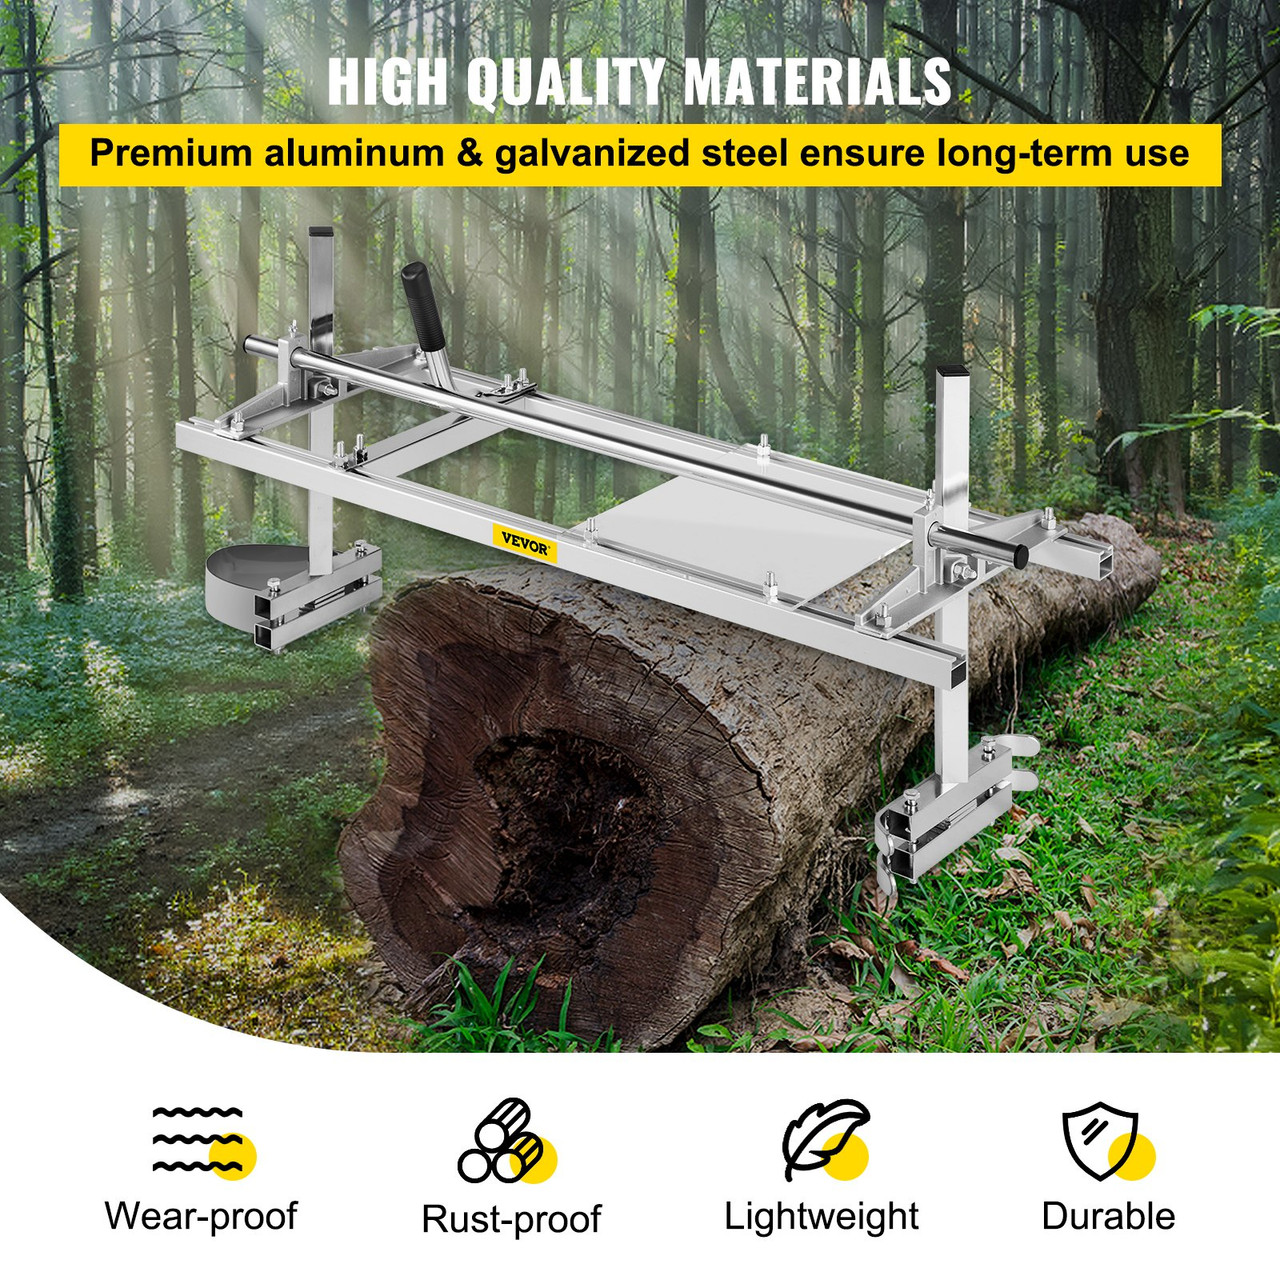 Chainsaw Mill Planking Milling 14" to 36" Guide Bar Wood Lumber Cutting Portable Sawmill Aluminum Steel Chainsaw Mill for Builders